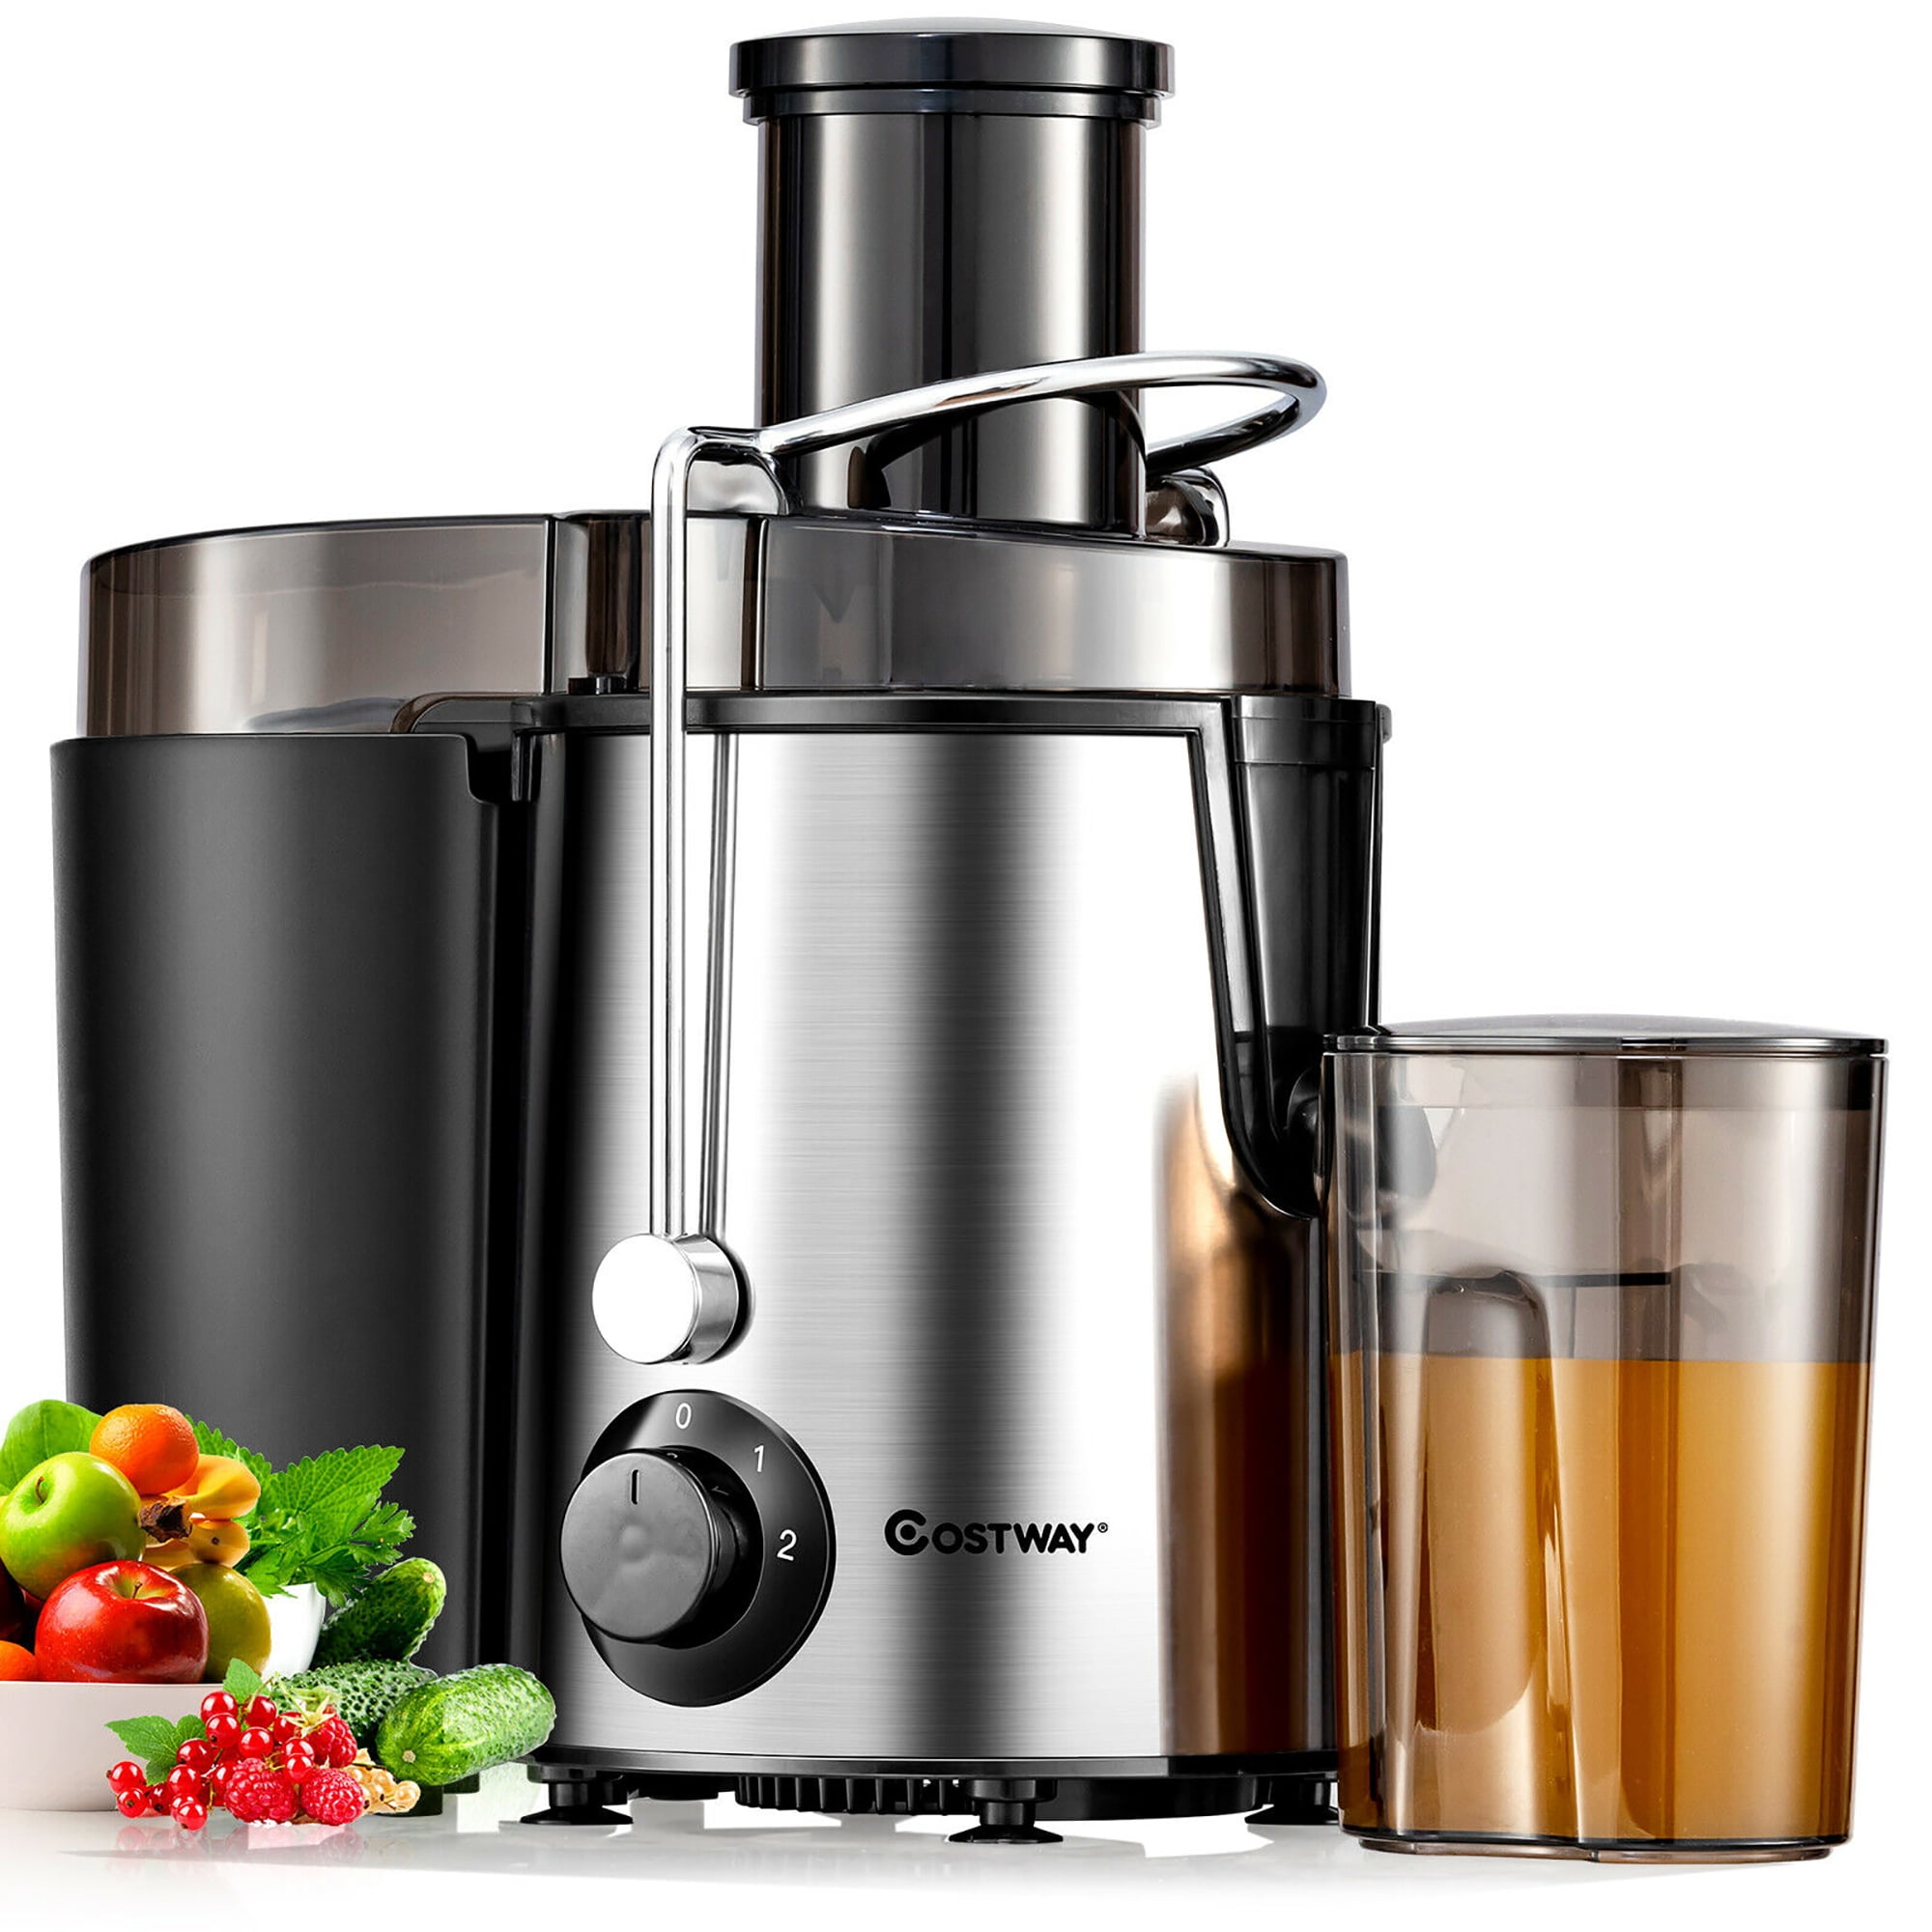  COSTWAY Electric 5-in-1 Professional Food Processer and Juicer  Combo, 800W Powerful Motor with 2-Speed, Food Grade Material includes Wide  Mouth Centrifugal Juicer, Smoothie Blender, Blender, Chopper Grinder, Meat  Grinder and Dough